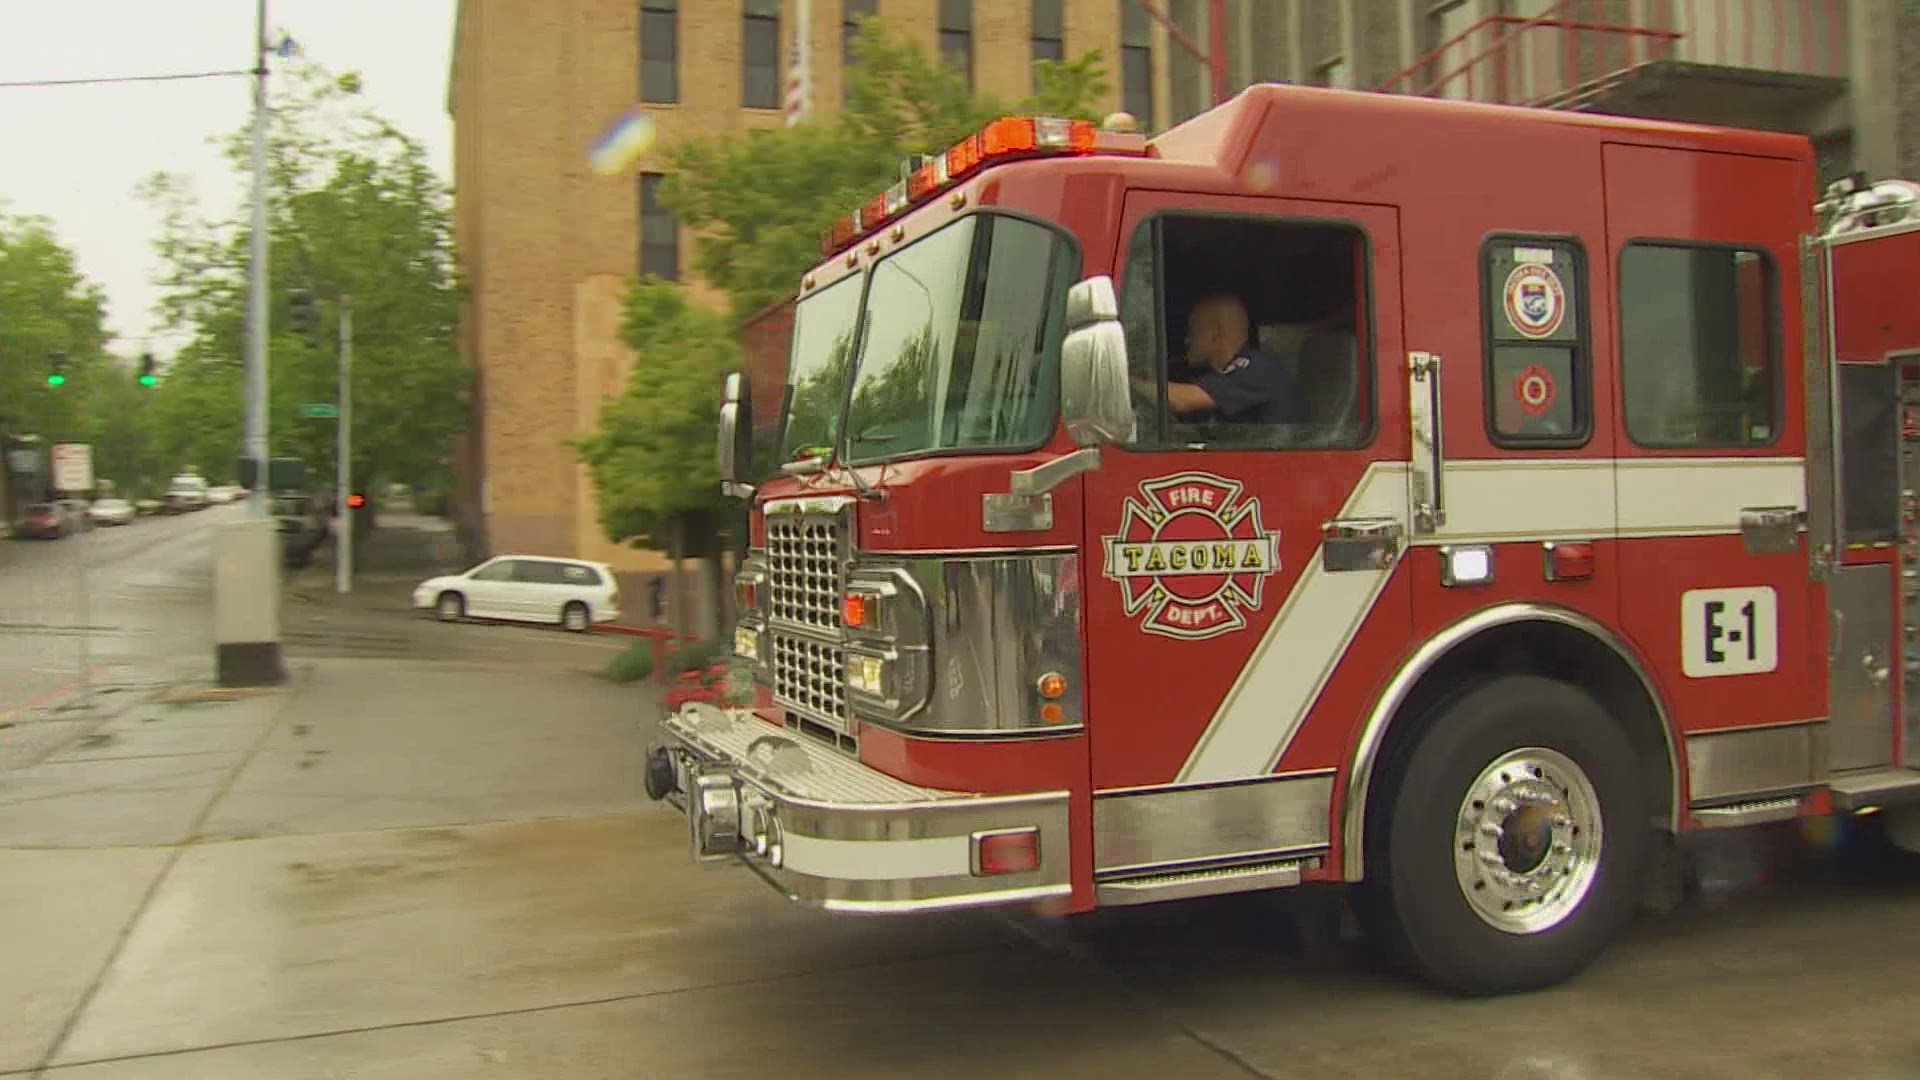 Tacoma Fire Department says no layoffs or station closures are on the table, but response times could get longer under the proposal.